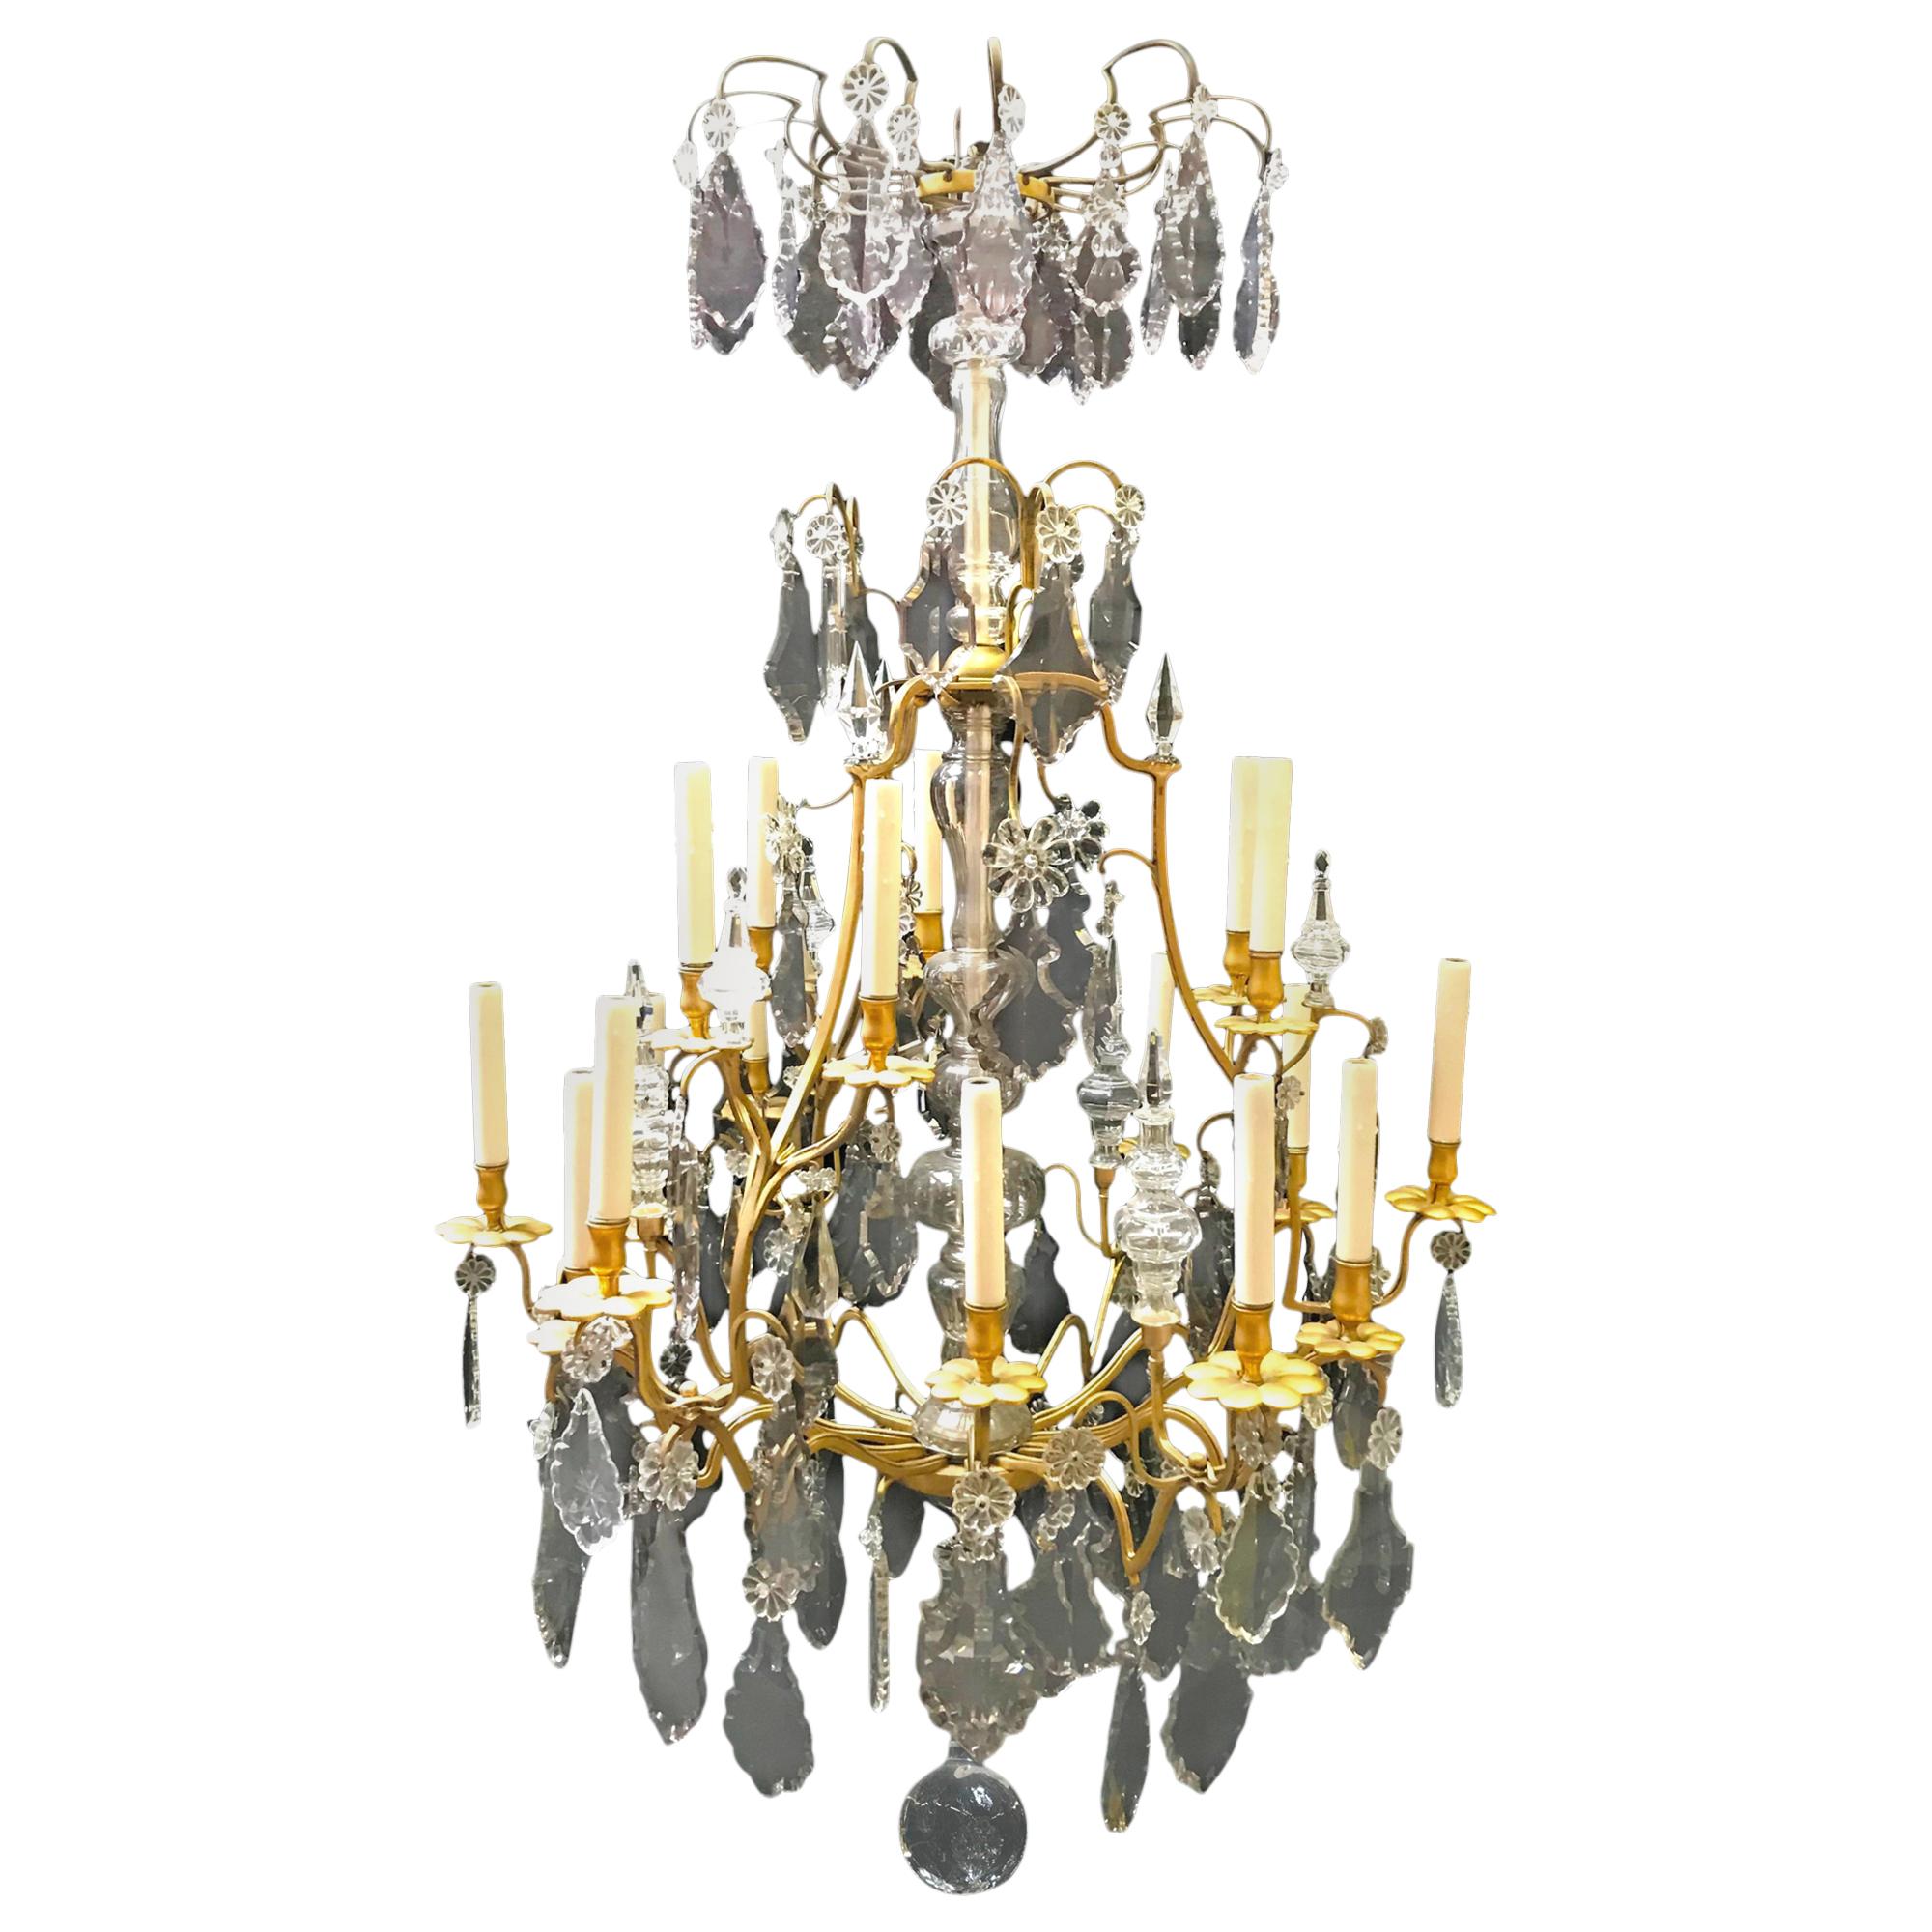 French Chrystal and Bronze Chandelier, 19th Century